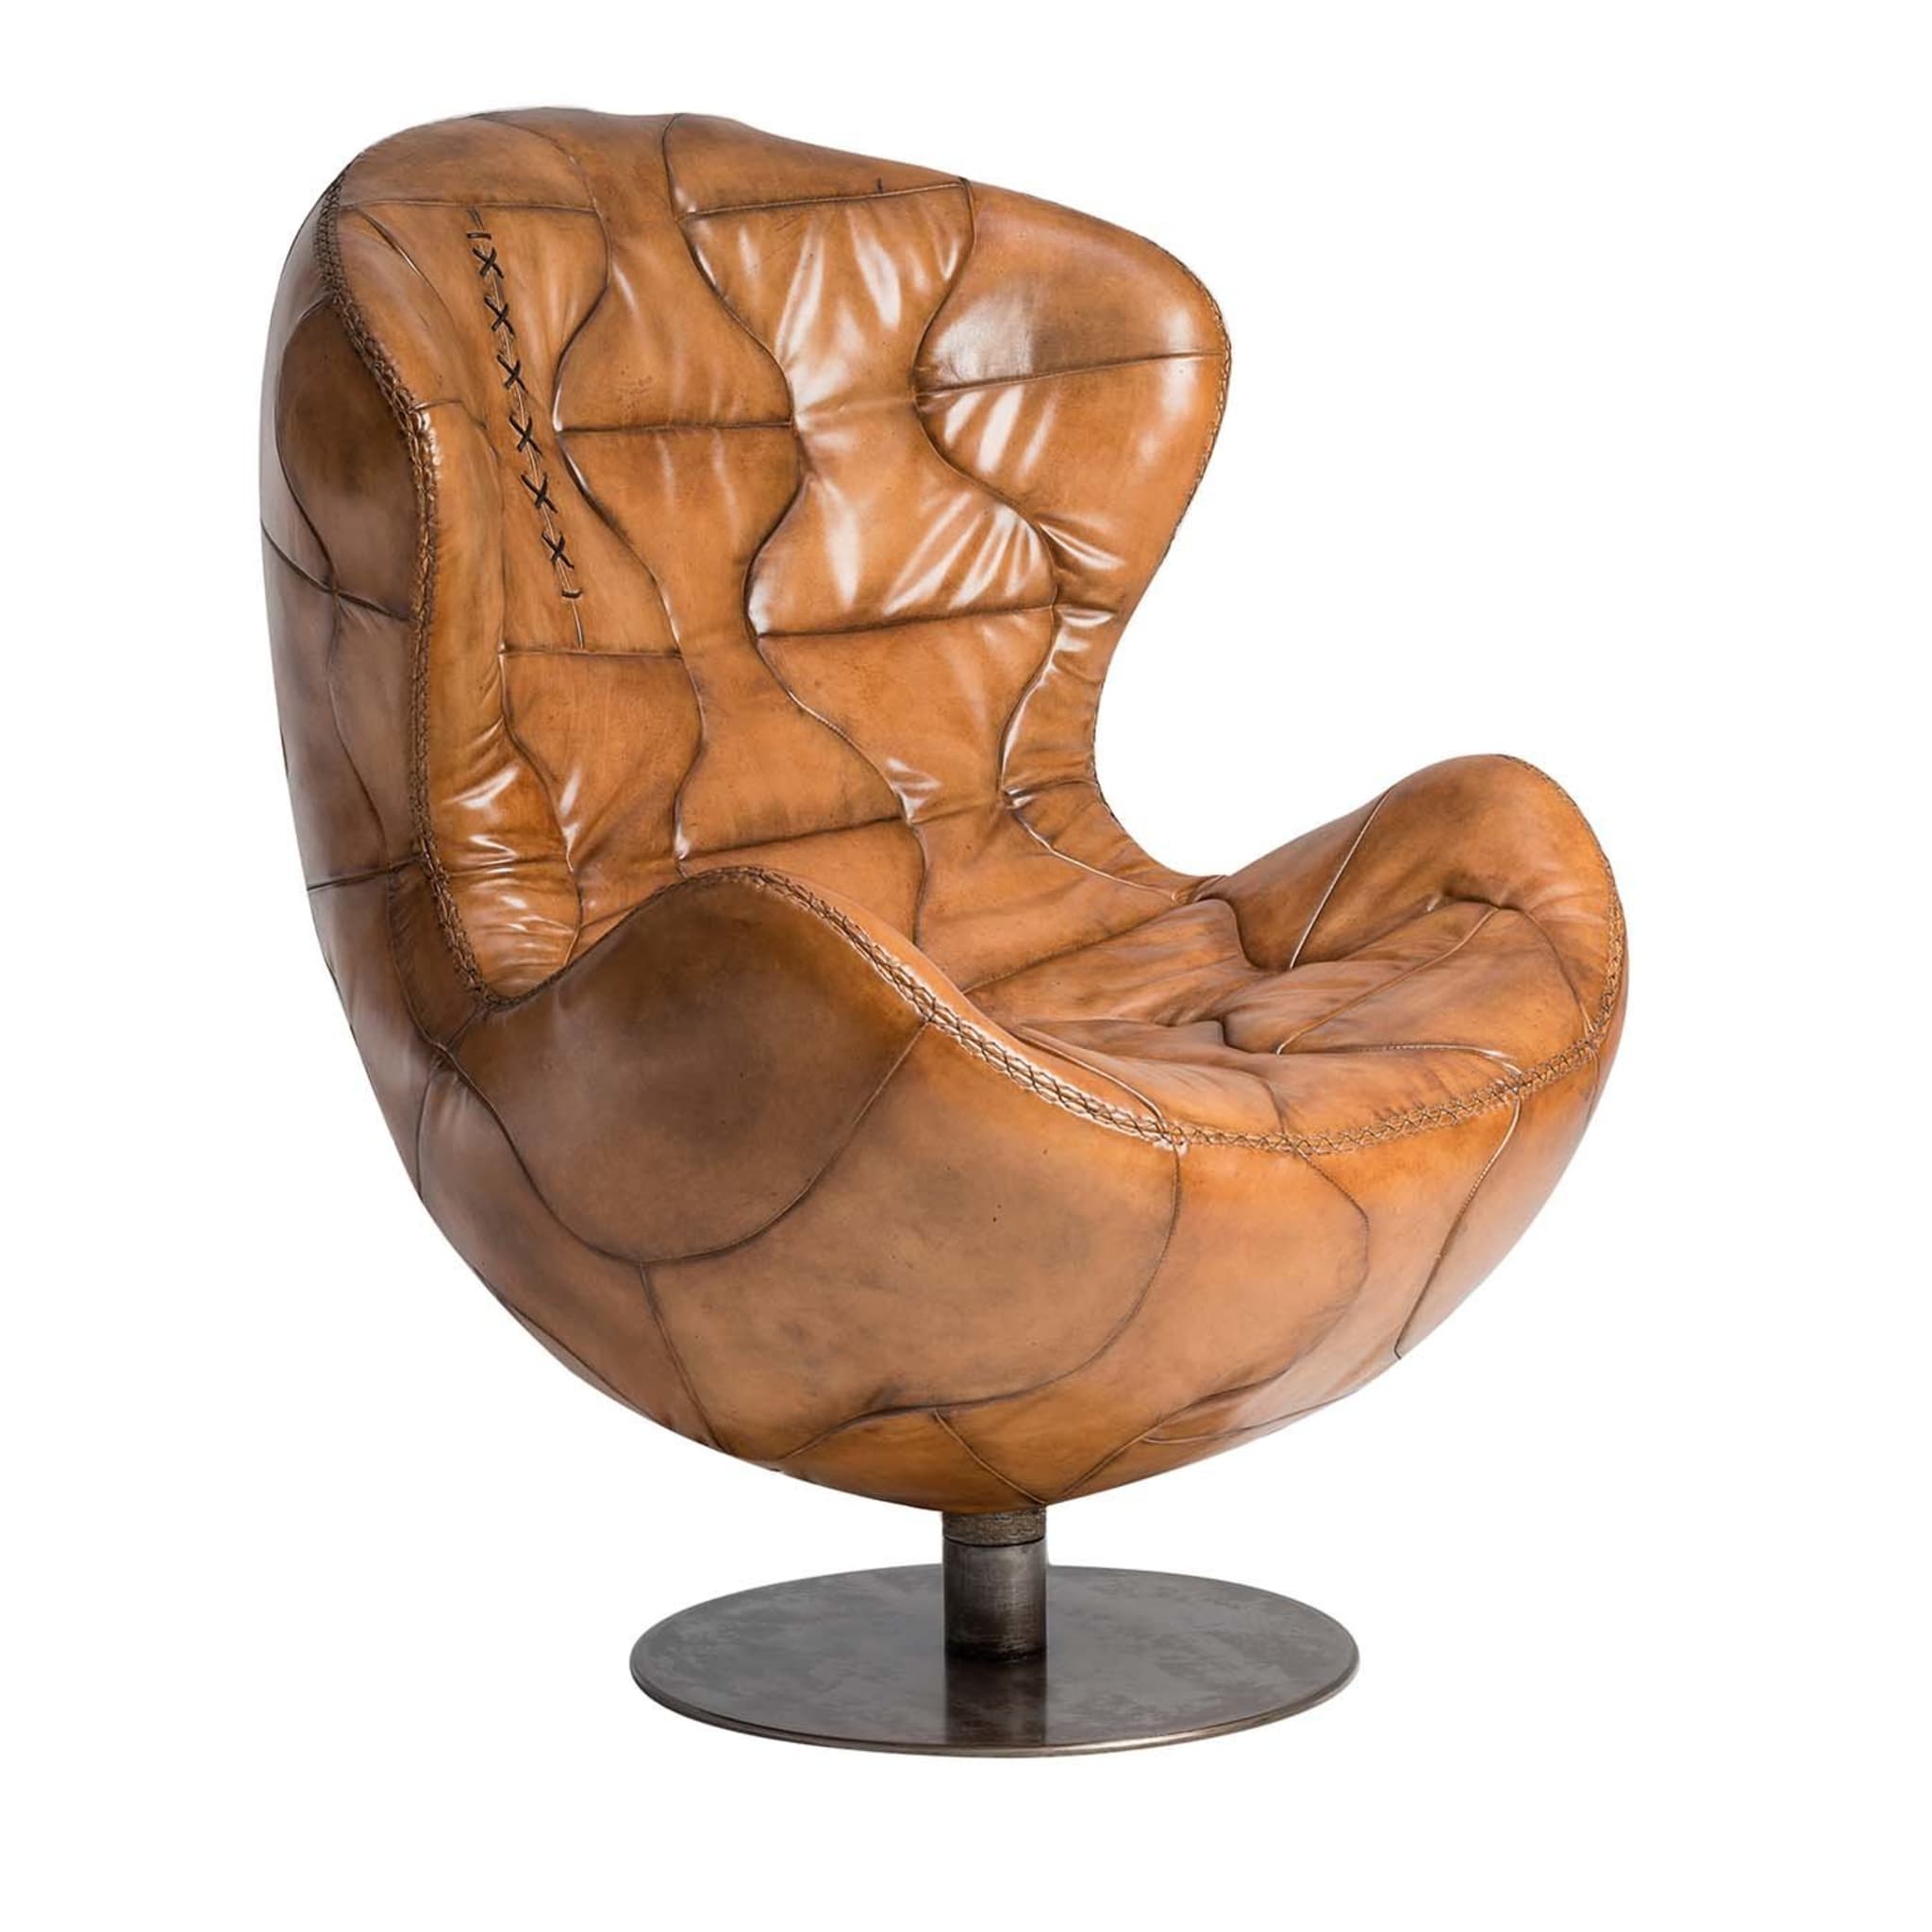 Pelé Armchair Tribeca Collection by Marco and Giulio Mantellassi - Main view